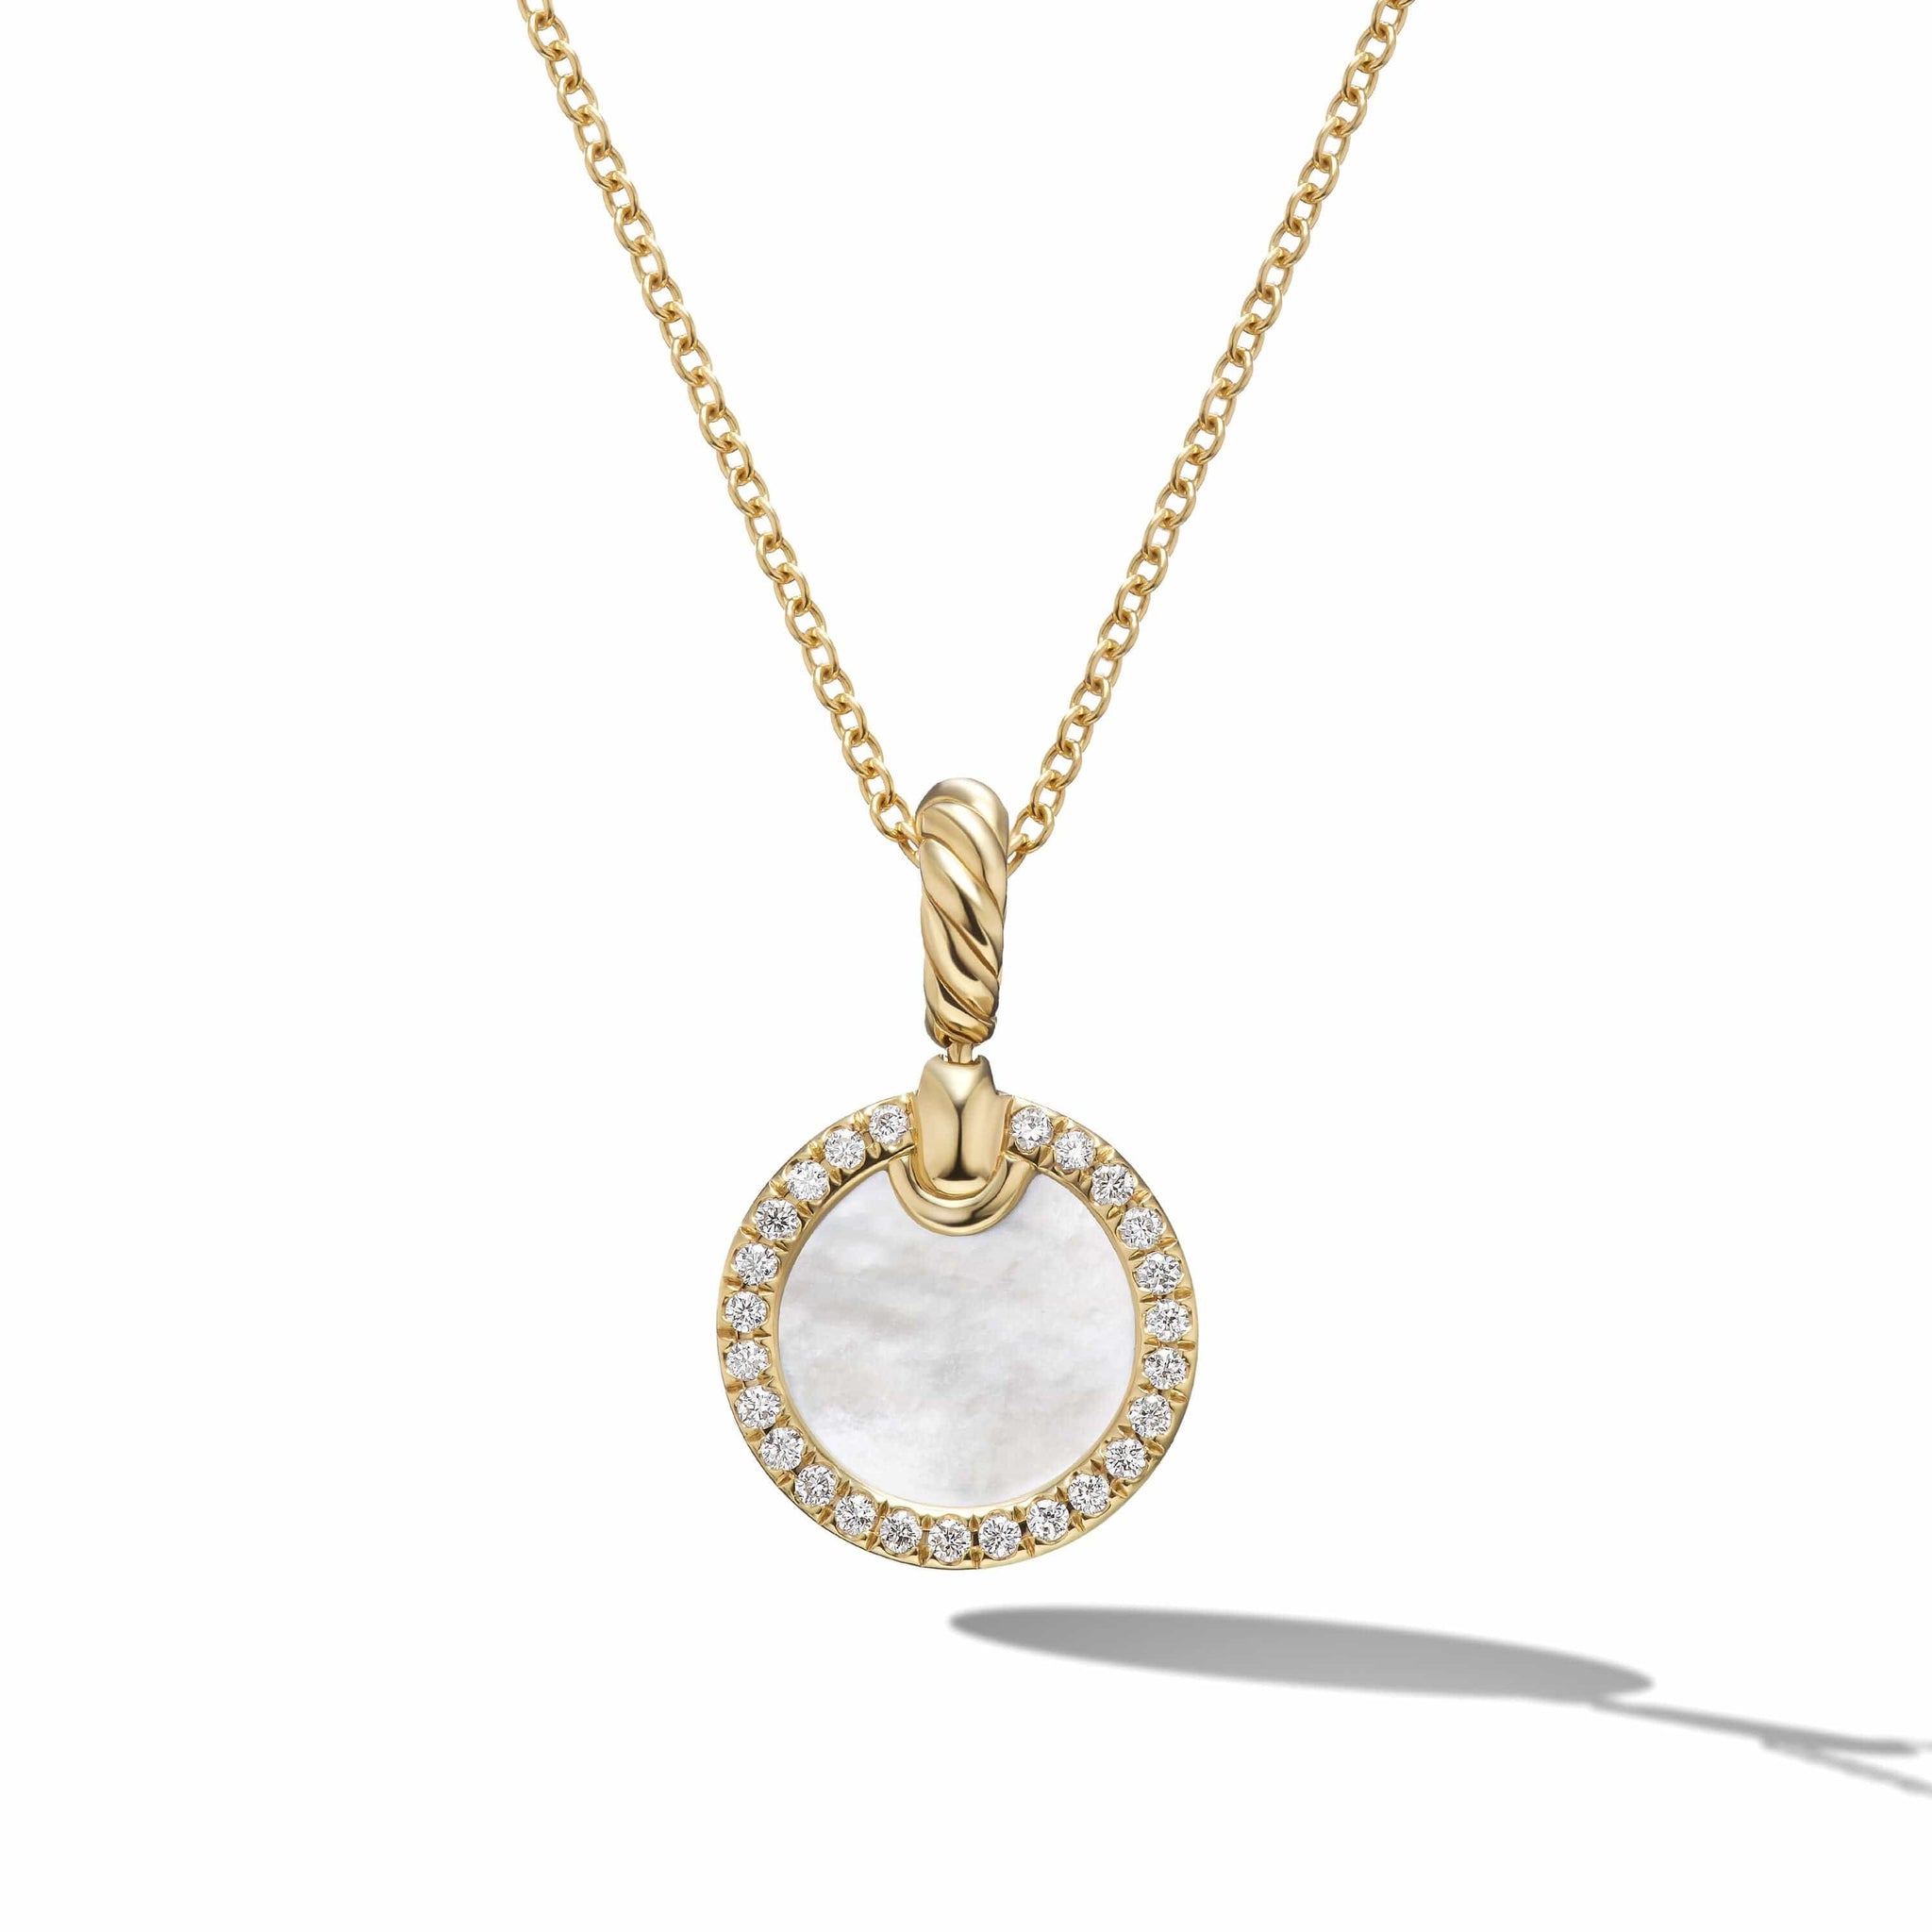 Petite DY Elements® Pendant Necklace in 18K Yellow Gold with Mother of Pearl and Pavé Diamonds